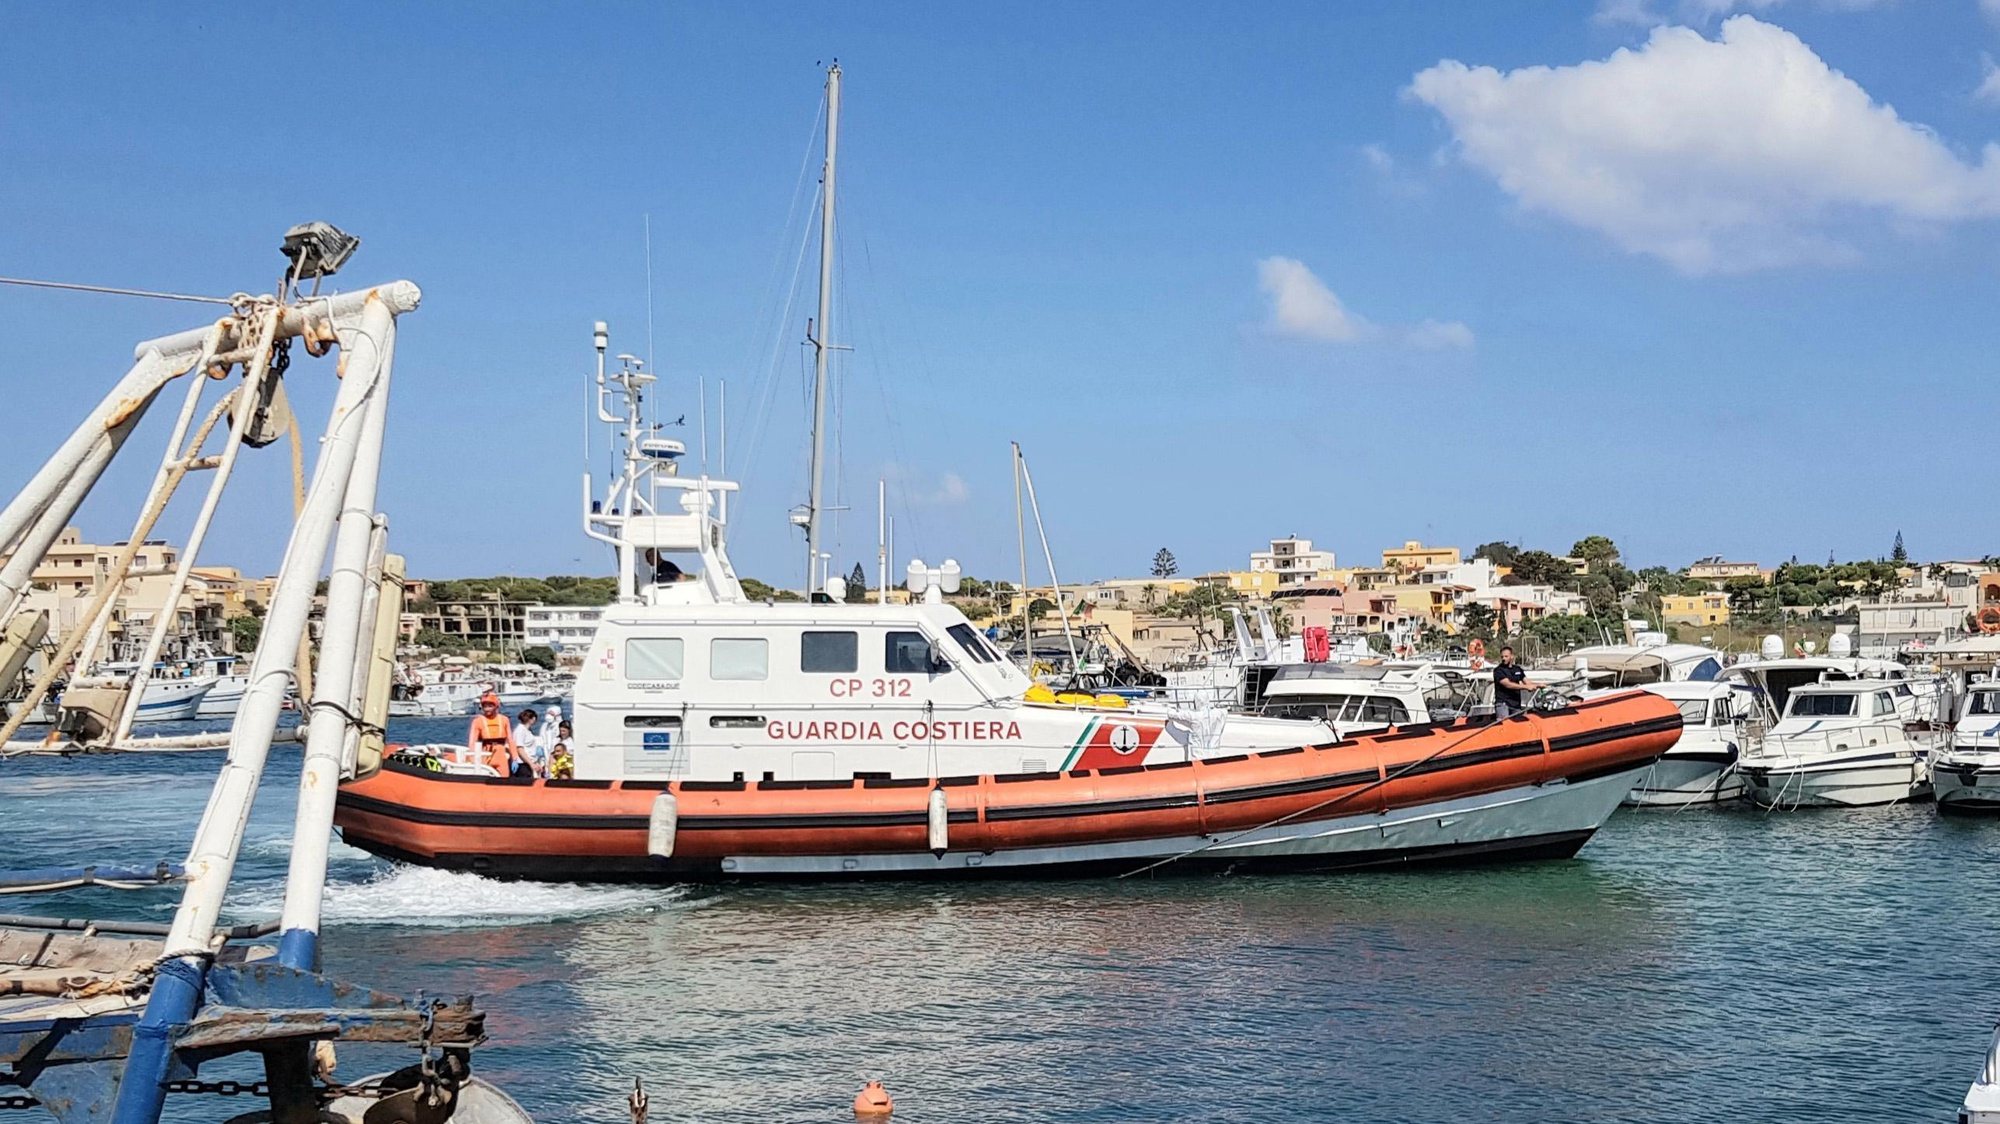 epa07781779 An Italian Coast Guard patrol boat carrying a migrant who reportedly dived into the sea from the Spanish NGO rescue ship Open Arms in an attempt to swim to the coast, arrives in Lampedusa, southern Italy, 20 August 2019. The Open Arms ship is anchored at about 800 meters from the rocks of Lampedusa Island. The man was recovered by the Coast Guard patrol boat.  EPA/ELIO DESIDERIO